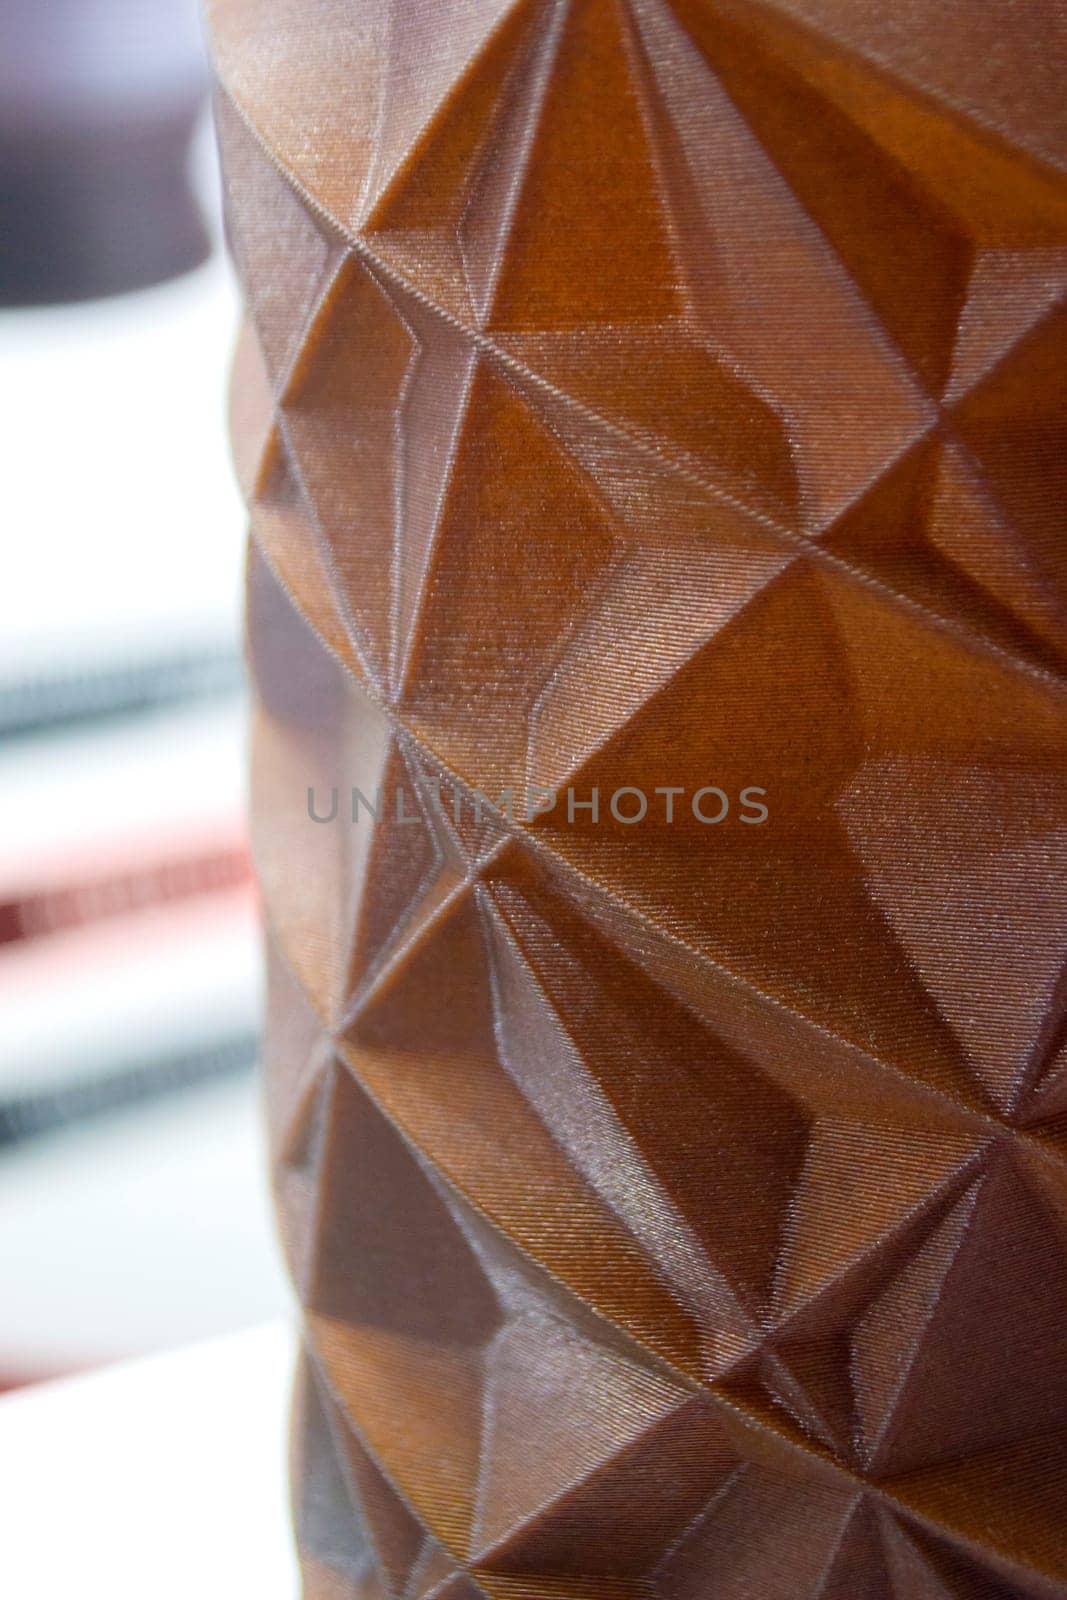 Art object vase printed 3D printer melted brown plastic addition of waste coffee by Mari1408